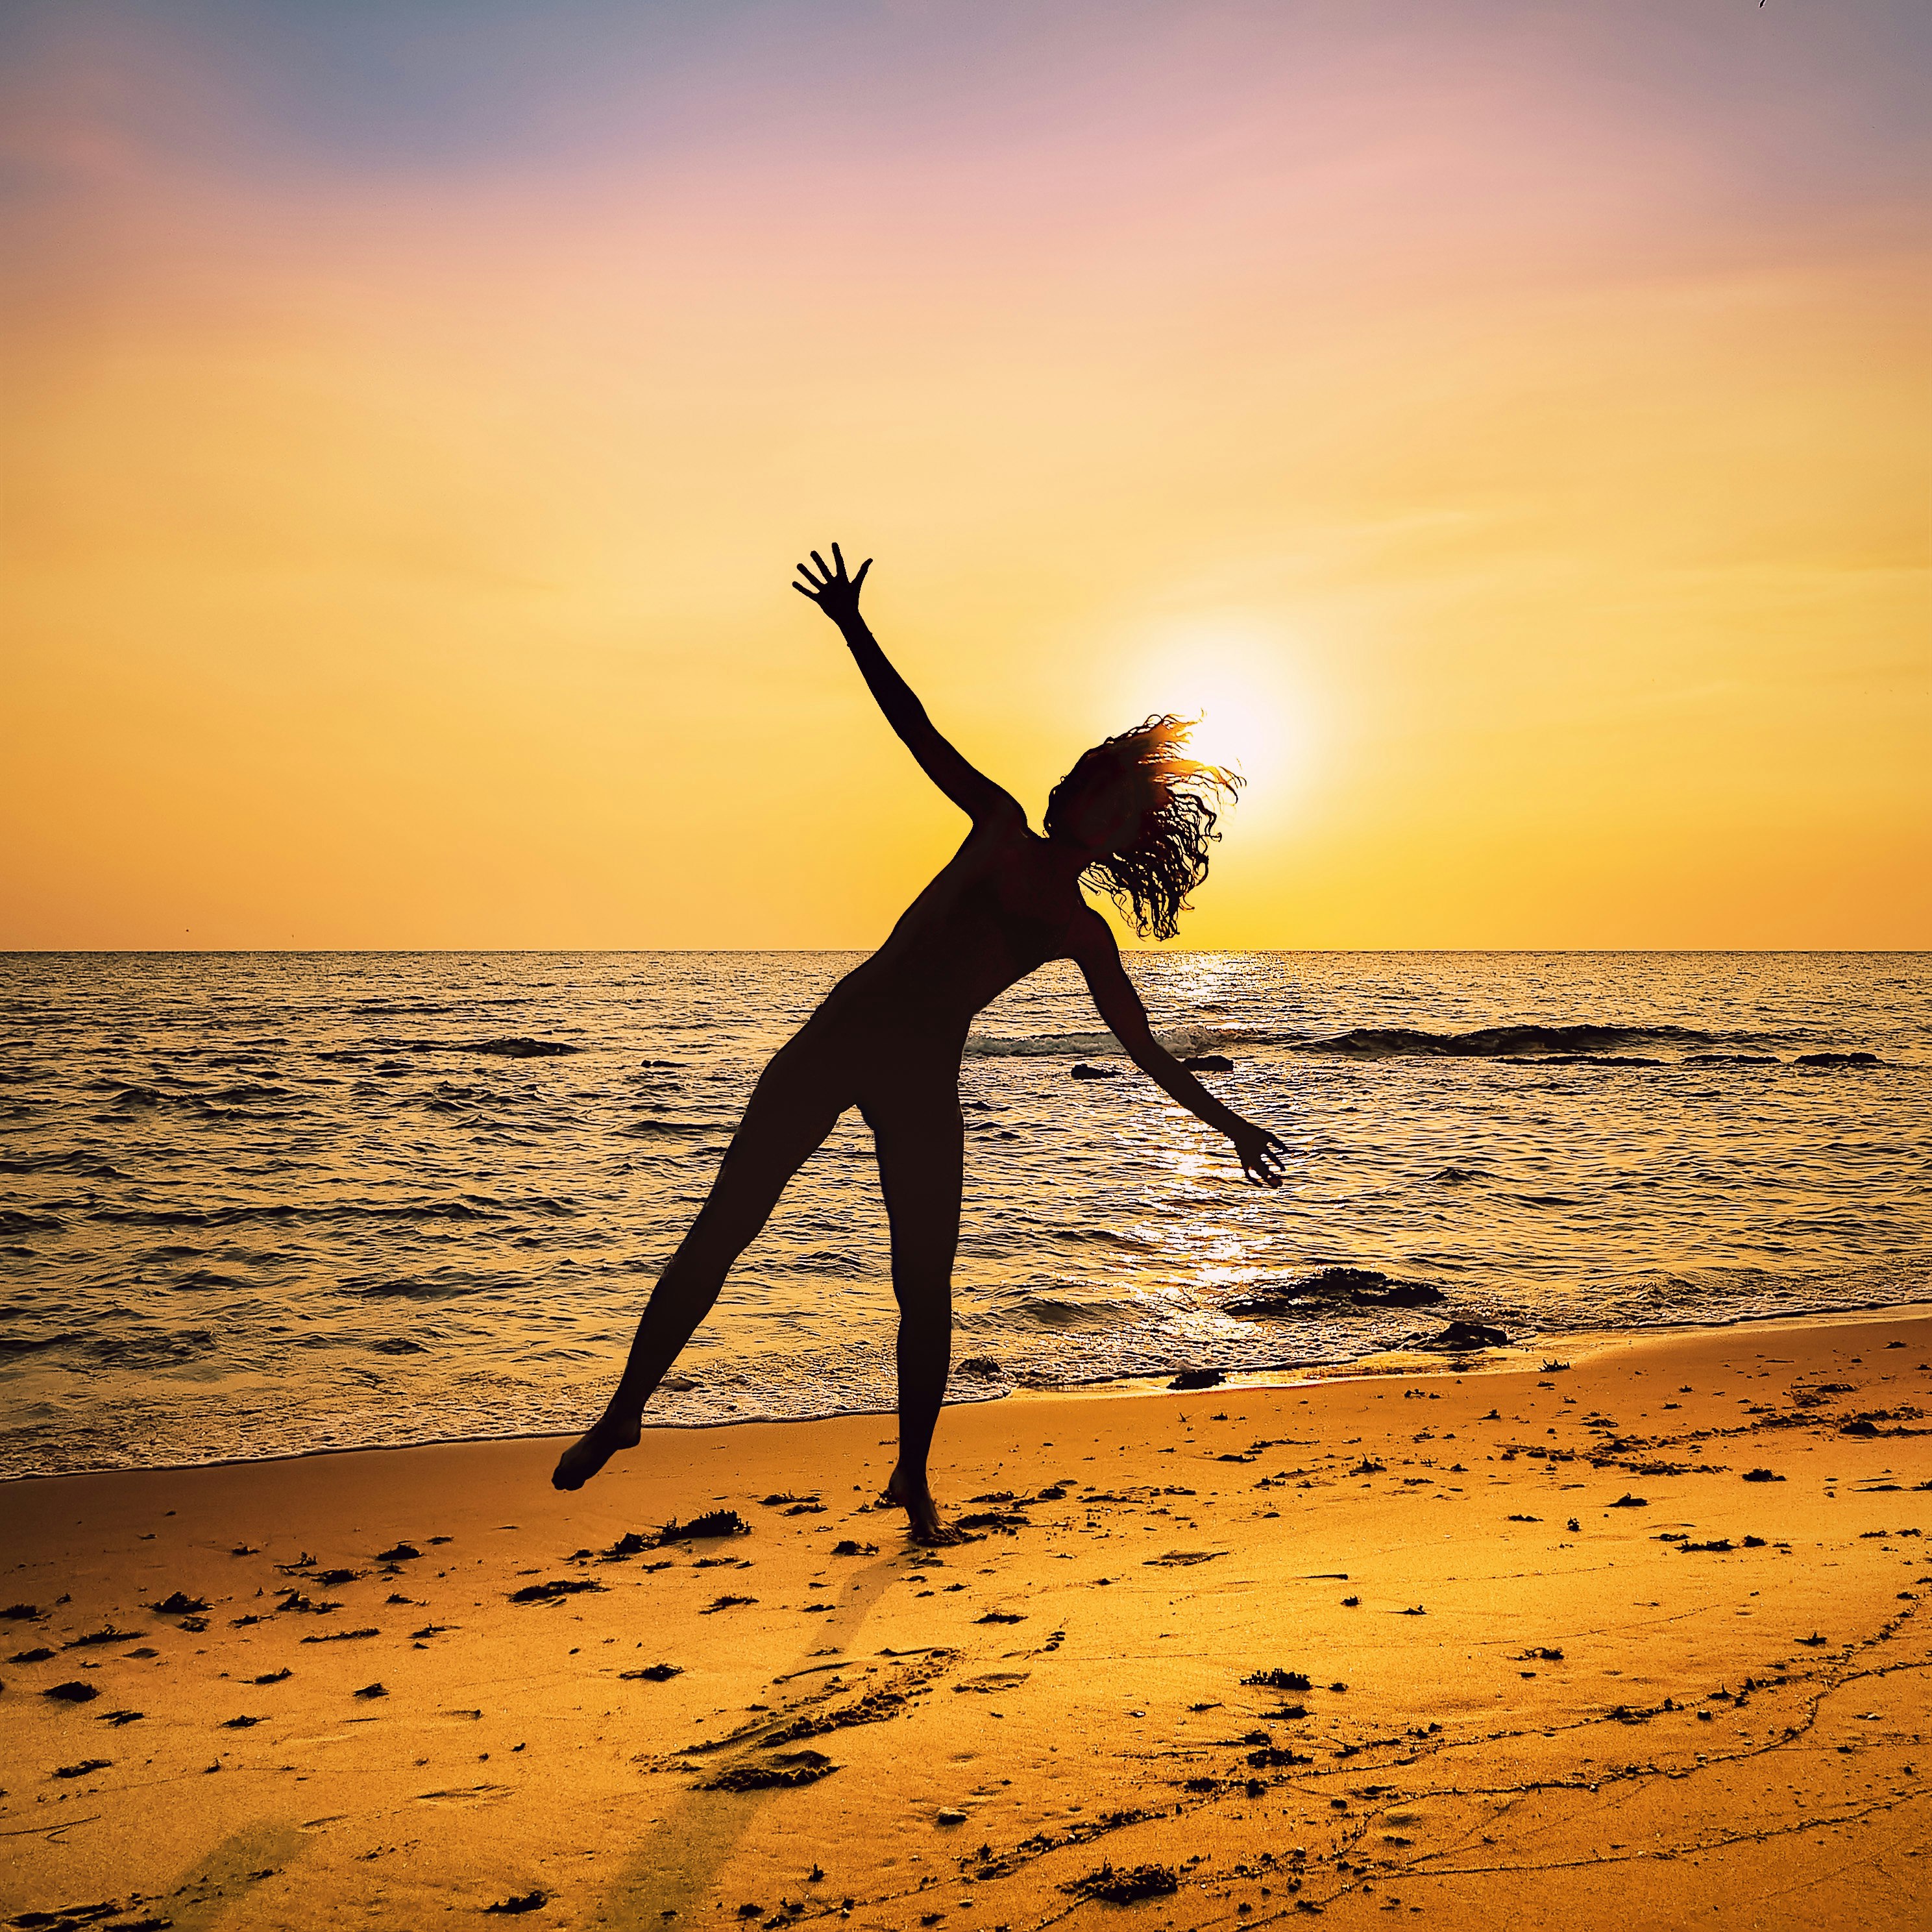 A woman about to do a cartwheel on the beach.